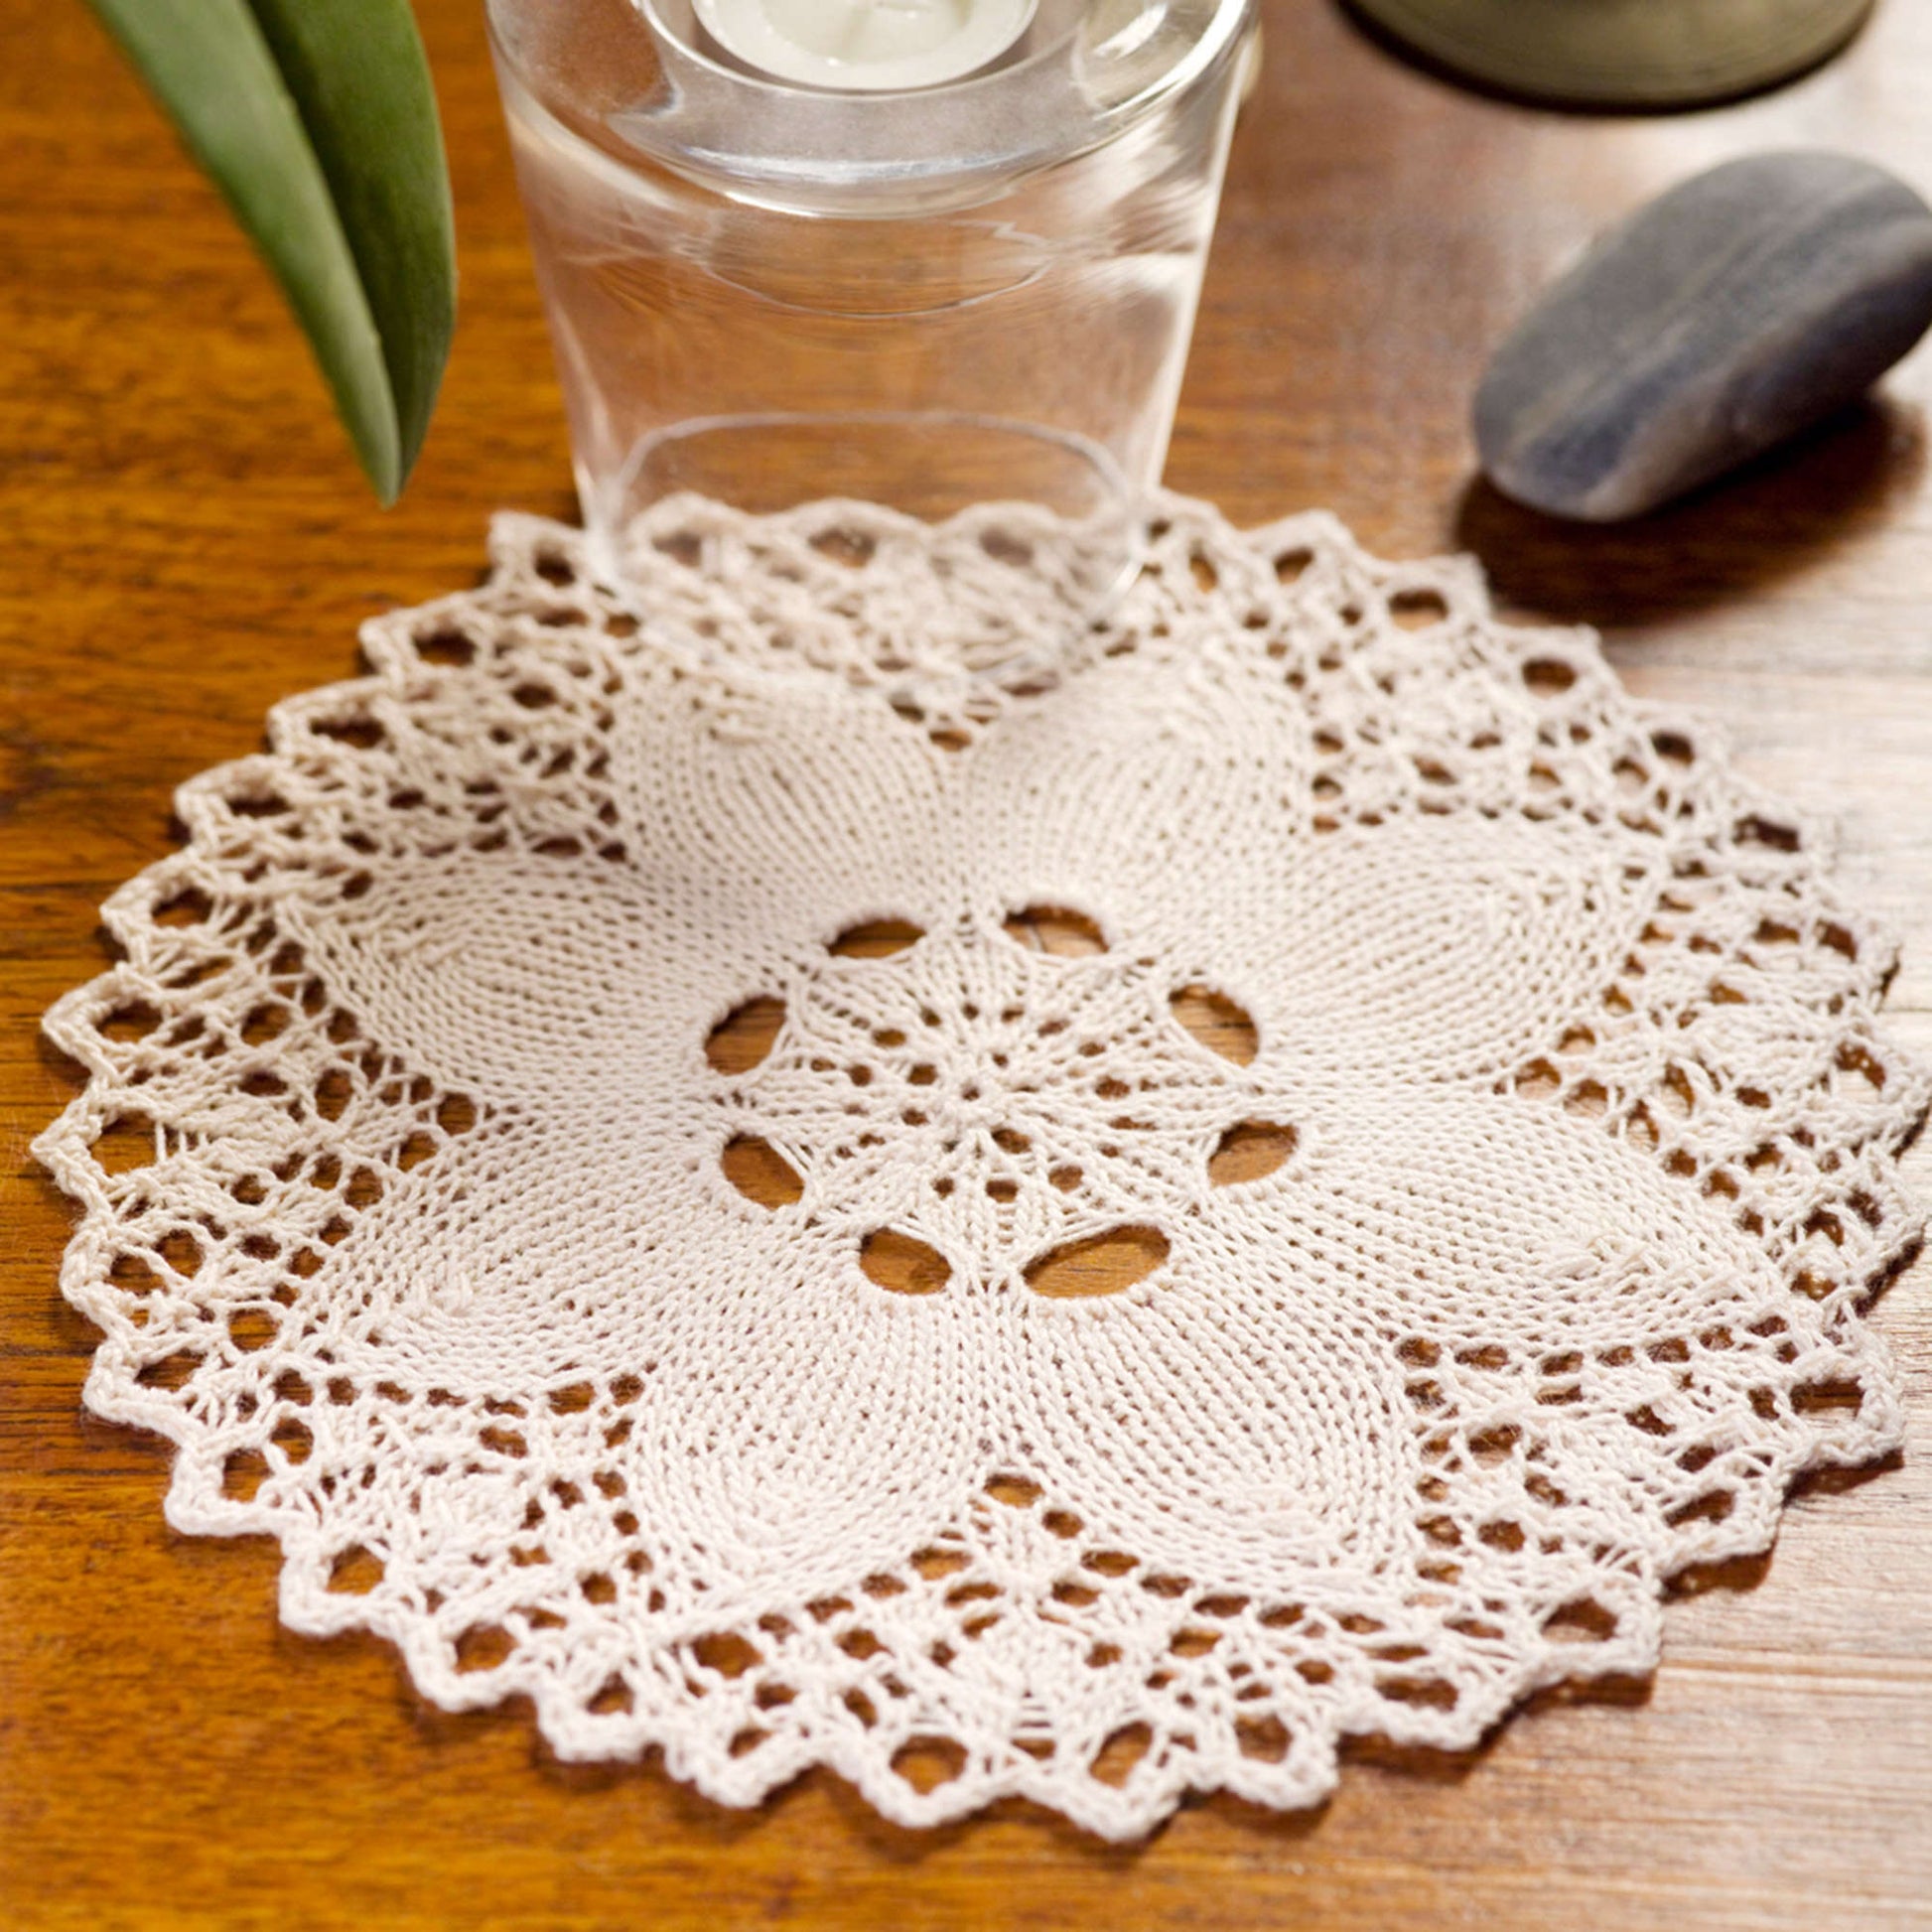 Aunt Lydia's Knit Flower Doily Knit Kitchen Décor made in Aunt Lydia's Bamboo Crochet Thread Size 10 yarn